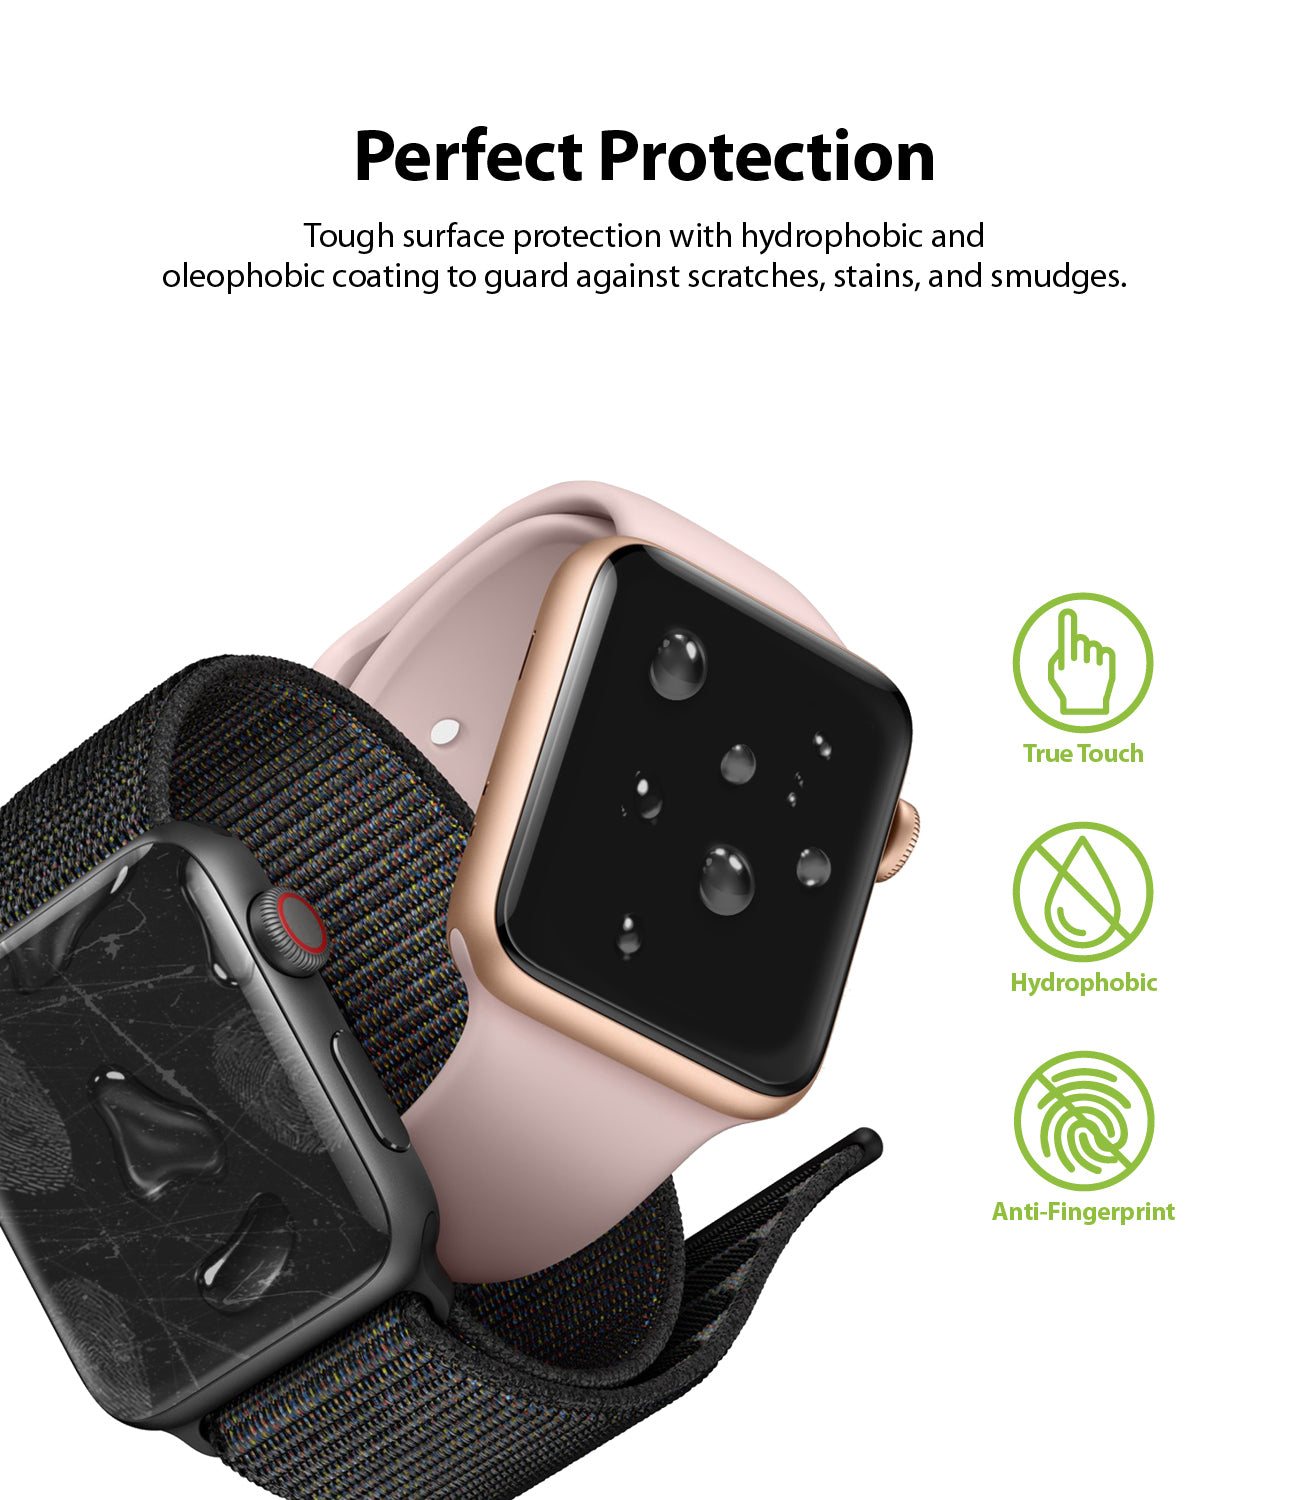 perfect protection : tough surface protection with hydrophobic and oleophobic coating to guard against scratches, stains, and smudges